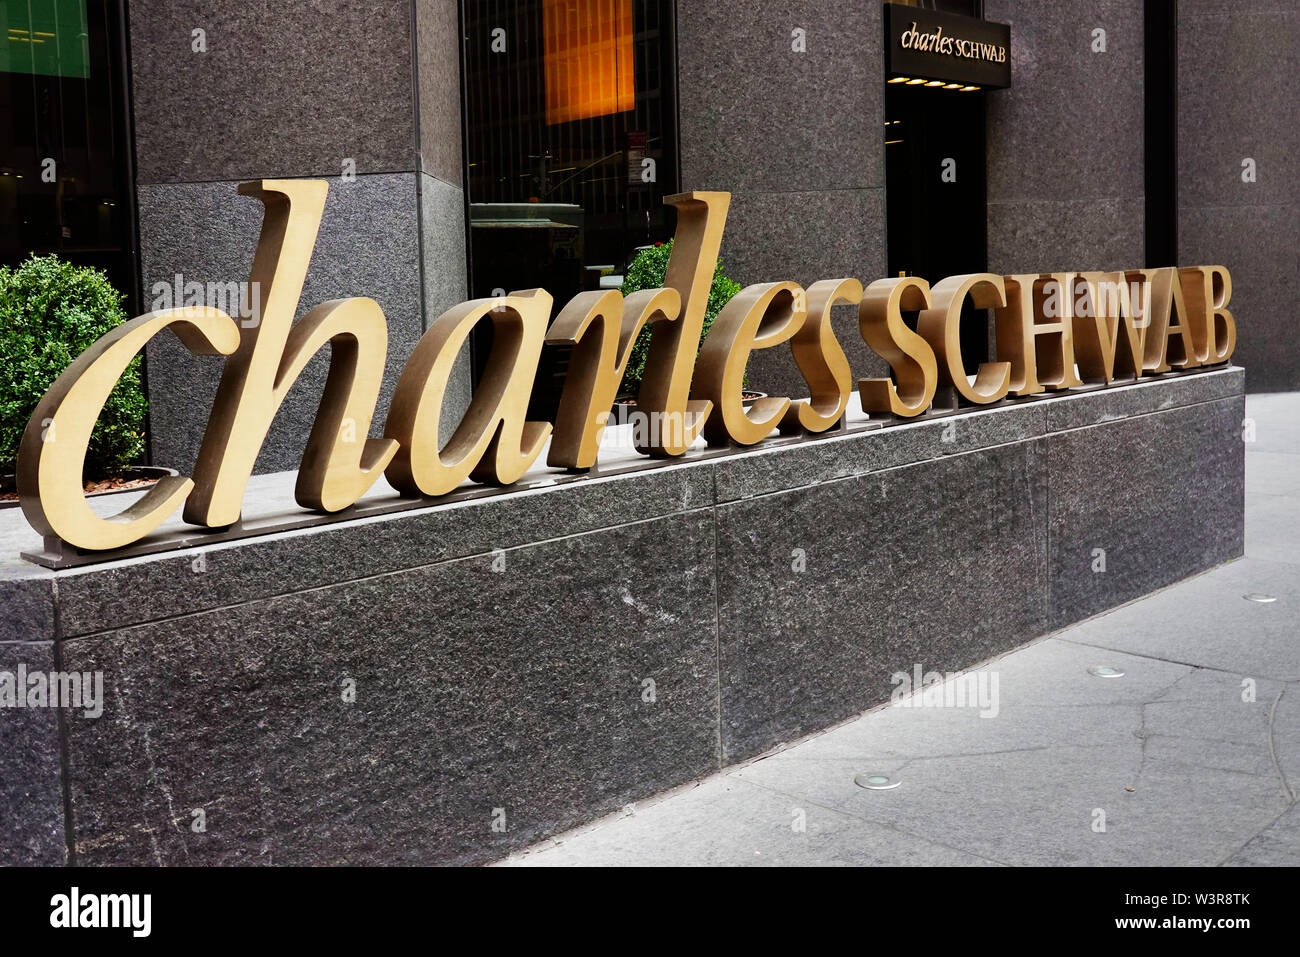 Charles Schwab Corporation NYC Banque D'Images